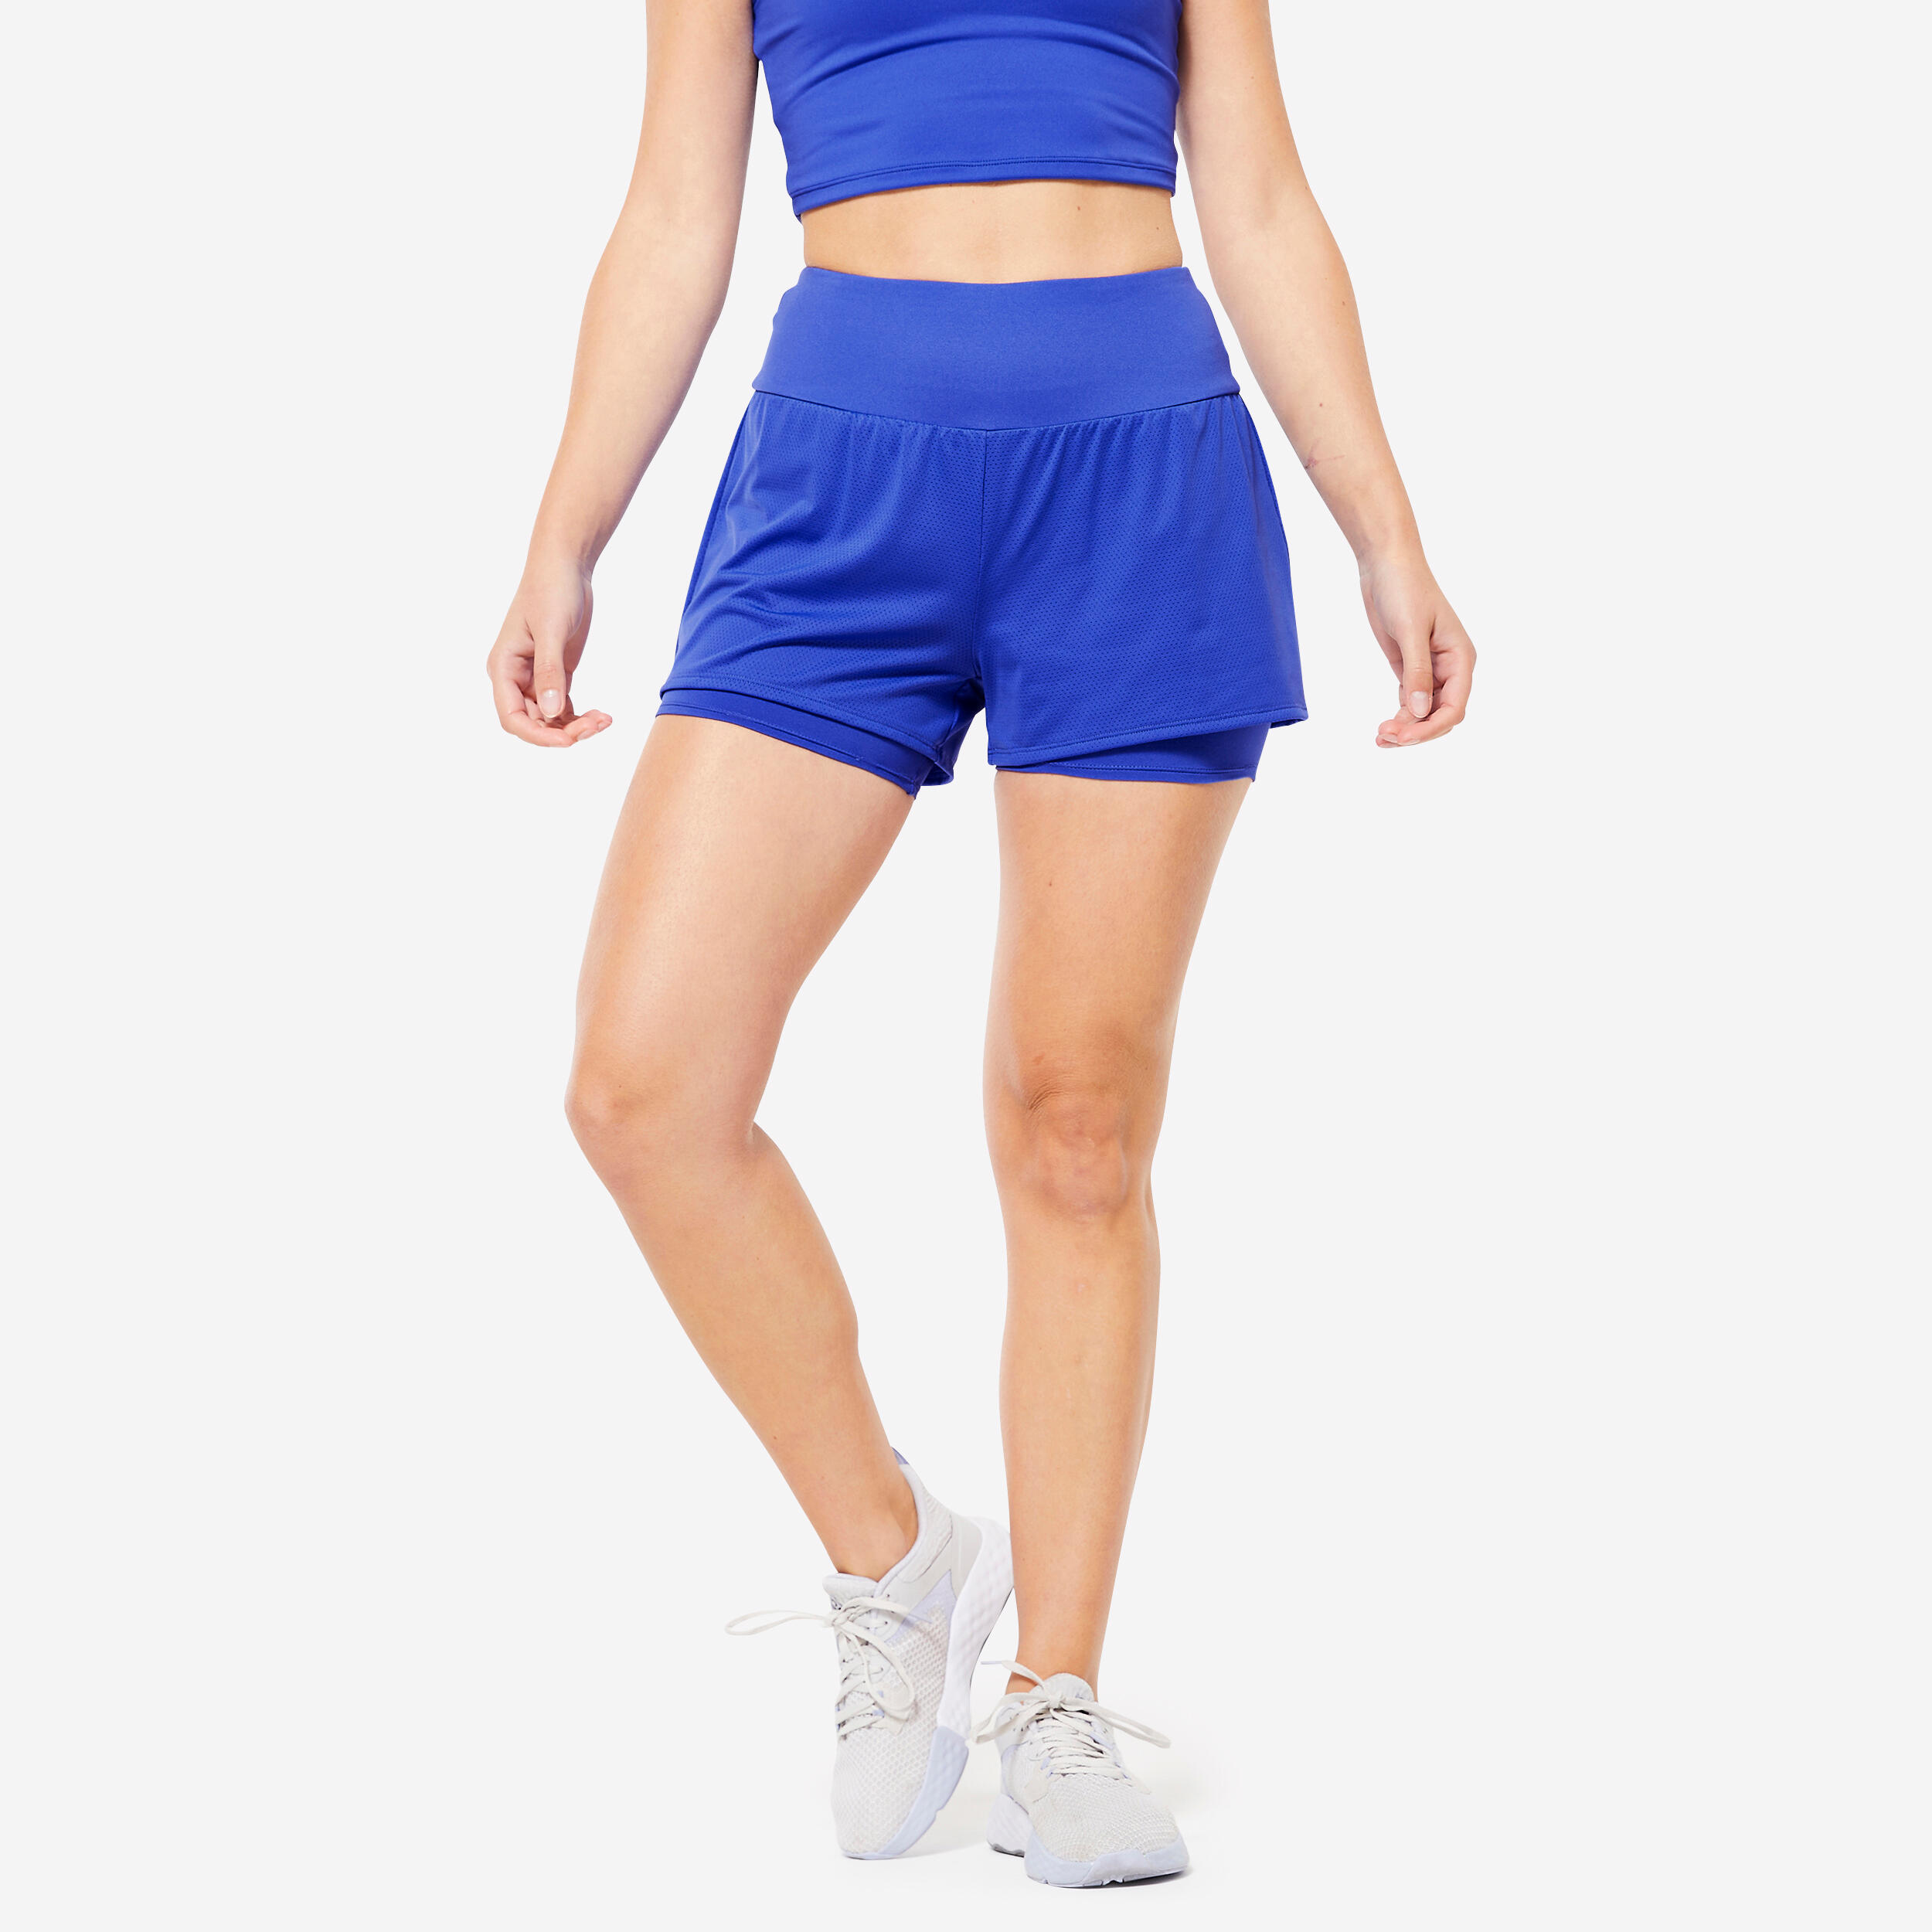 DOMYOS 2-in-1 Anti-Chafing Fitness Short Shorts - Blue